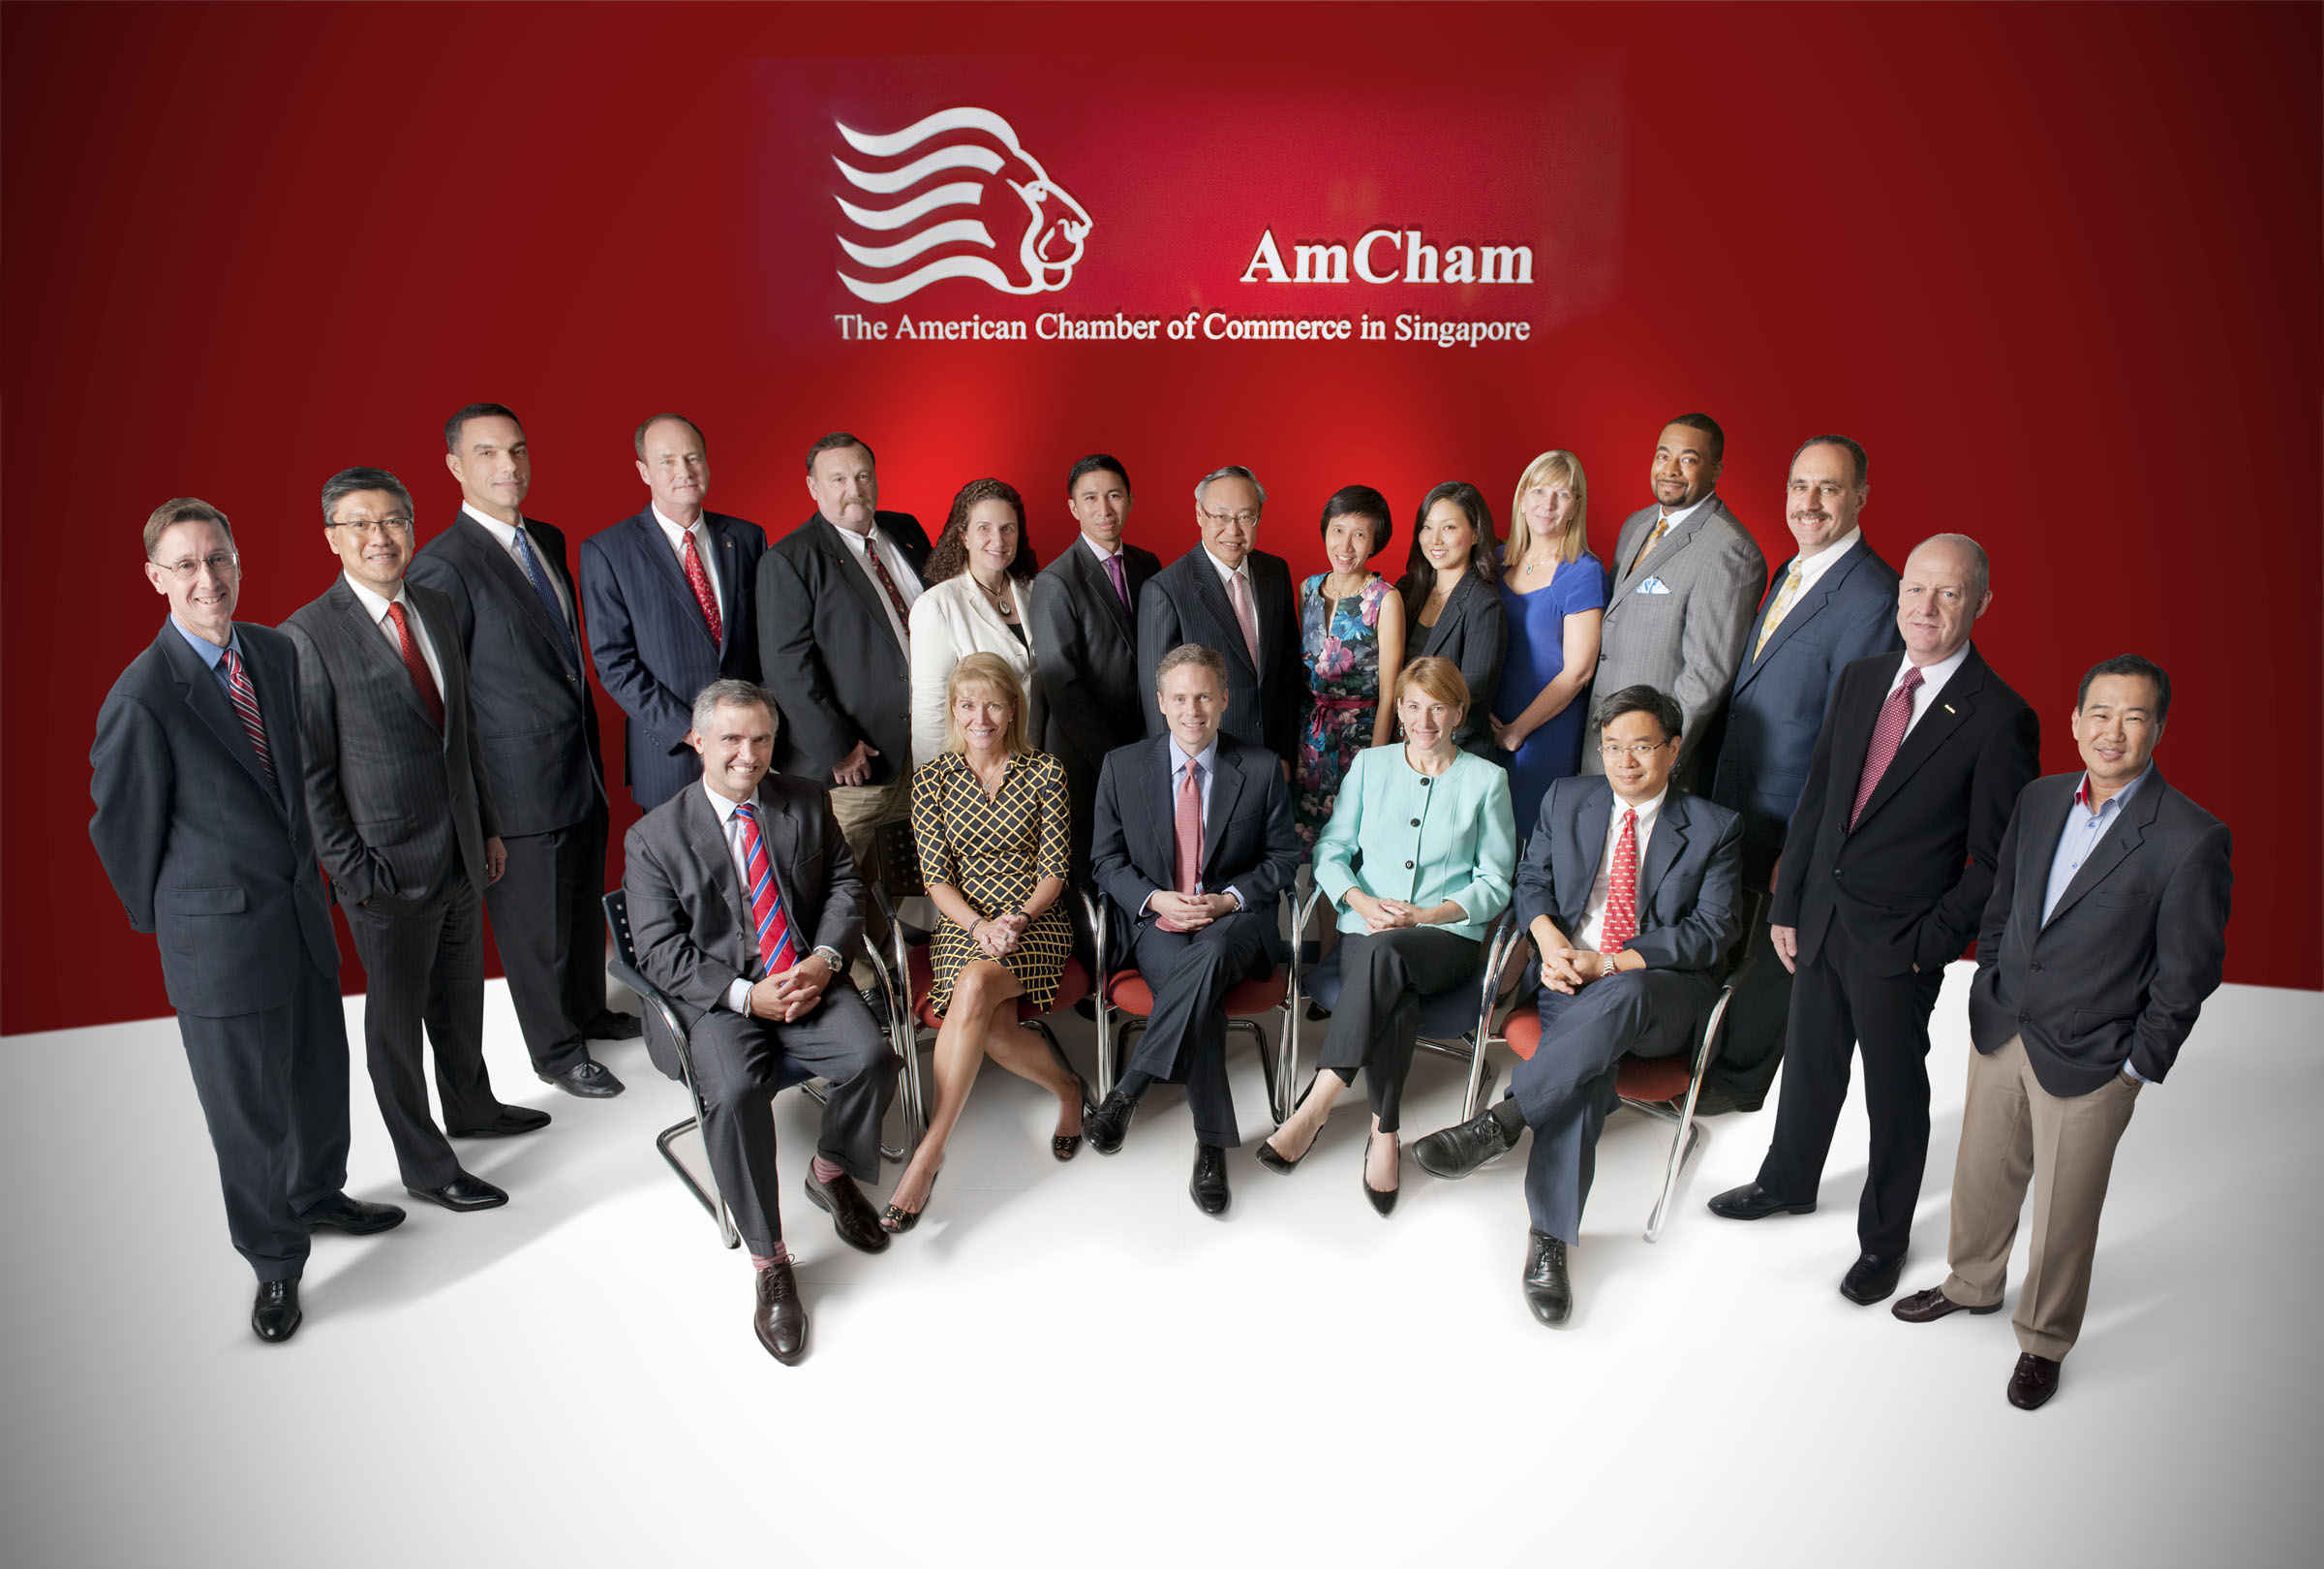 Group photo of business professionals from American Chamber of Commerce Singapore during a professional company photoshoot in an office setting Credit: White Room Studio